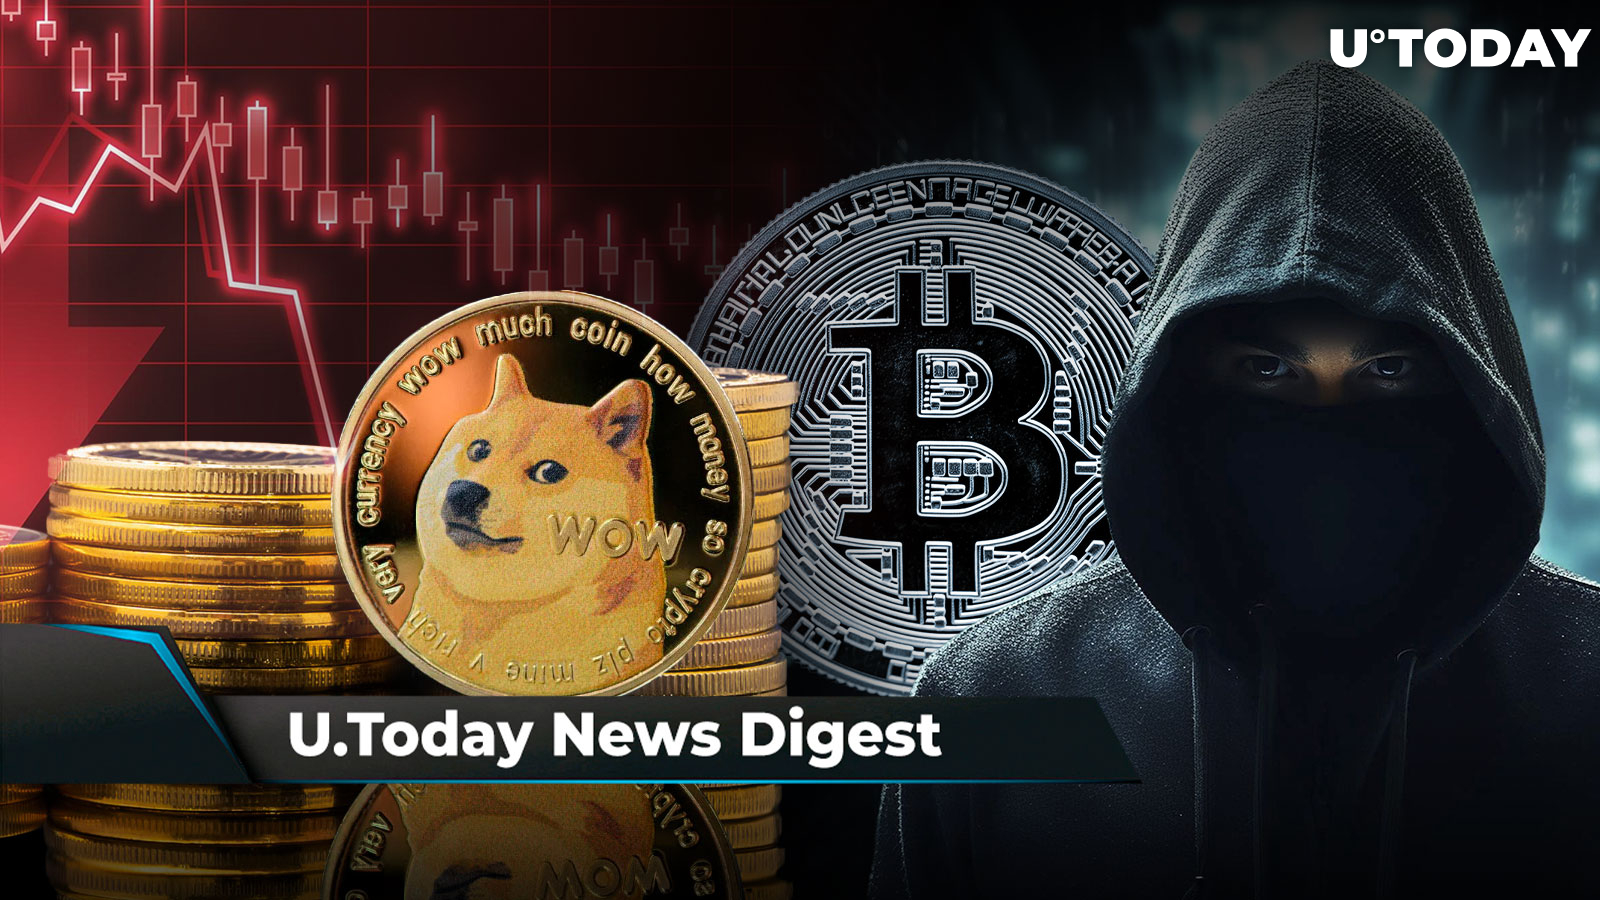 Bitcoin to Hit $50,000 After Bullish Weekly Divergence, Dogecoin No Longer Top 10 Coin, VanEck's and Tether's Top Exec Opines Whether Satoshi Nakamoto Is Alive: Crypto News Digest by U.Today